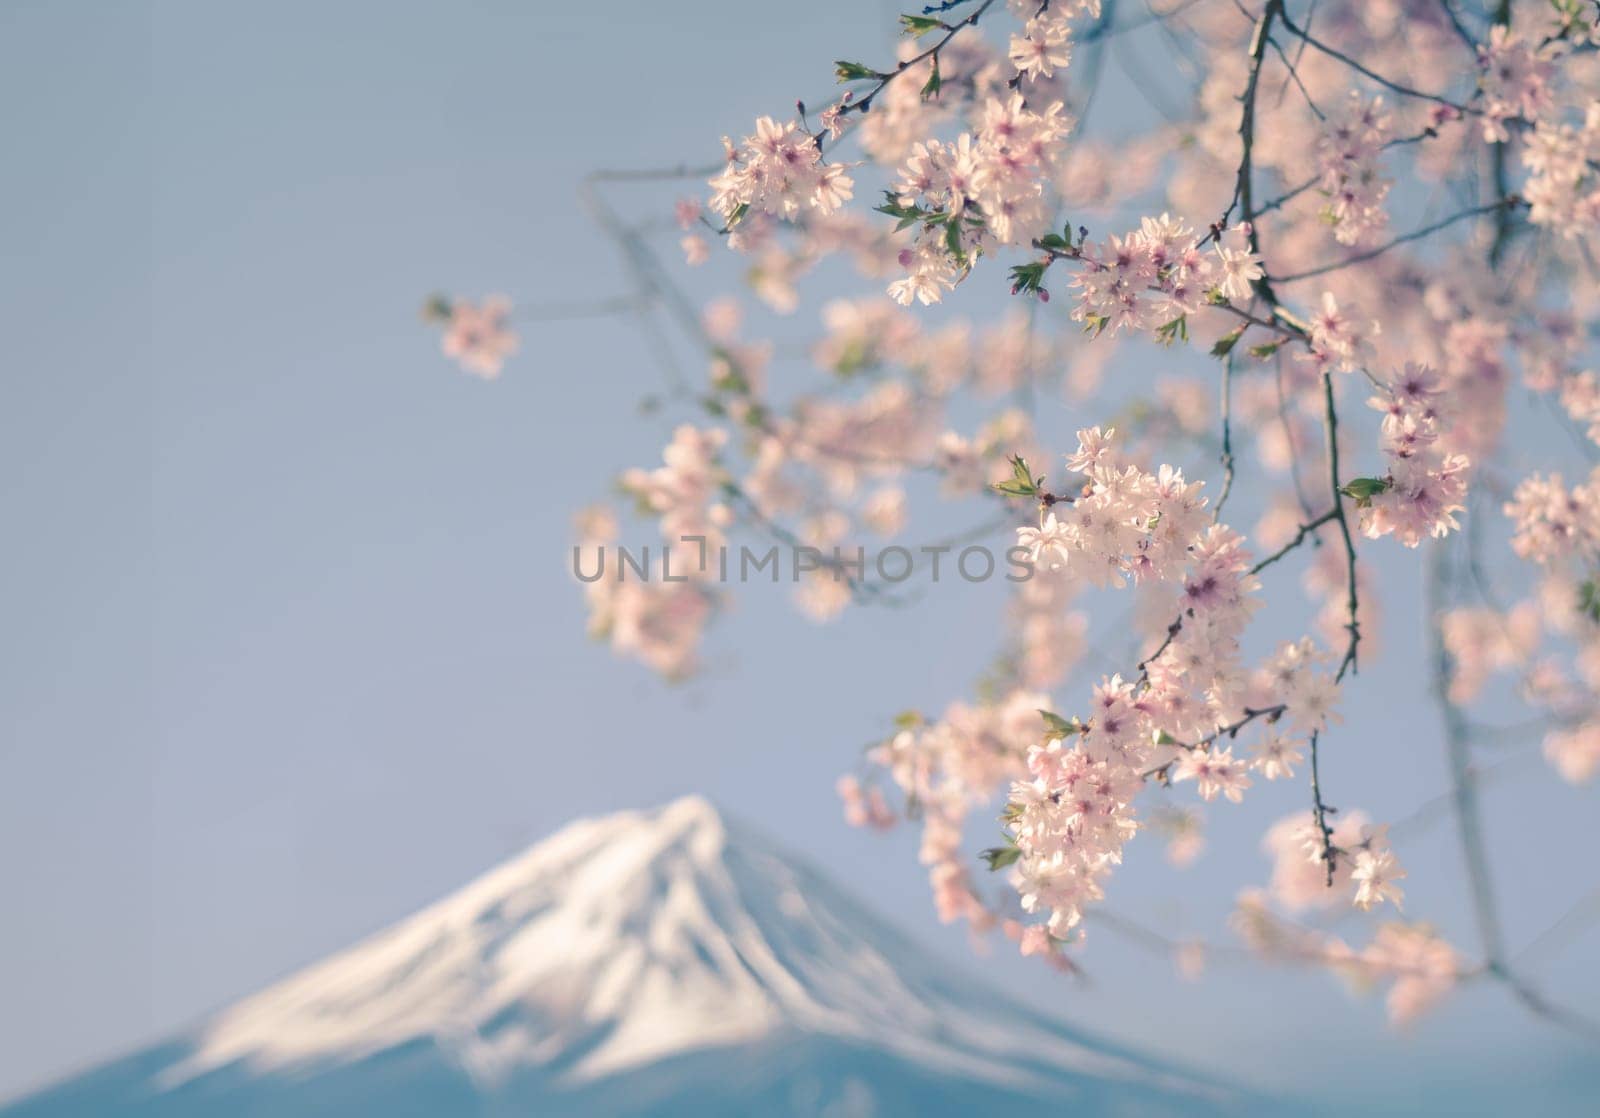 Mount Fuji In Japan Framed With Pastel Retro Pink Cherry Blossom Flowers For Spring, With Copy Space